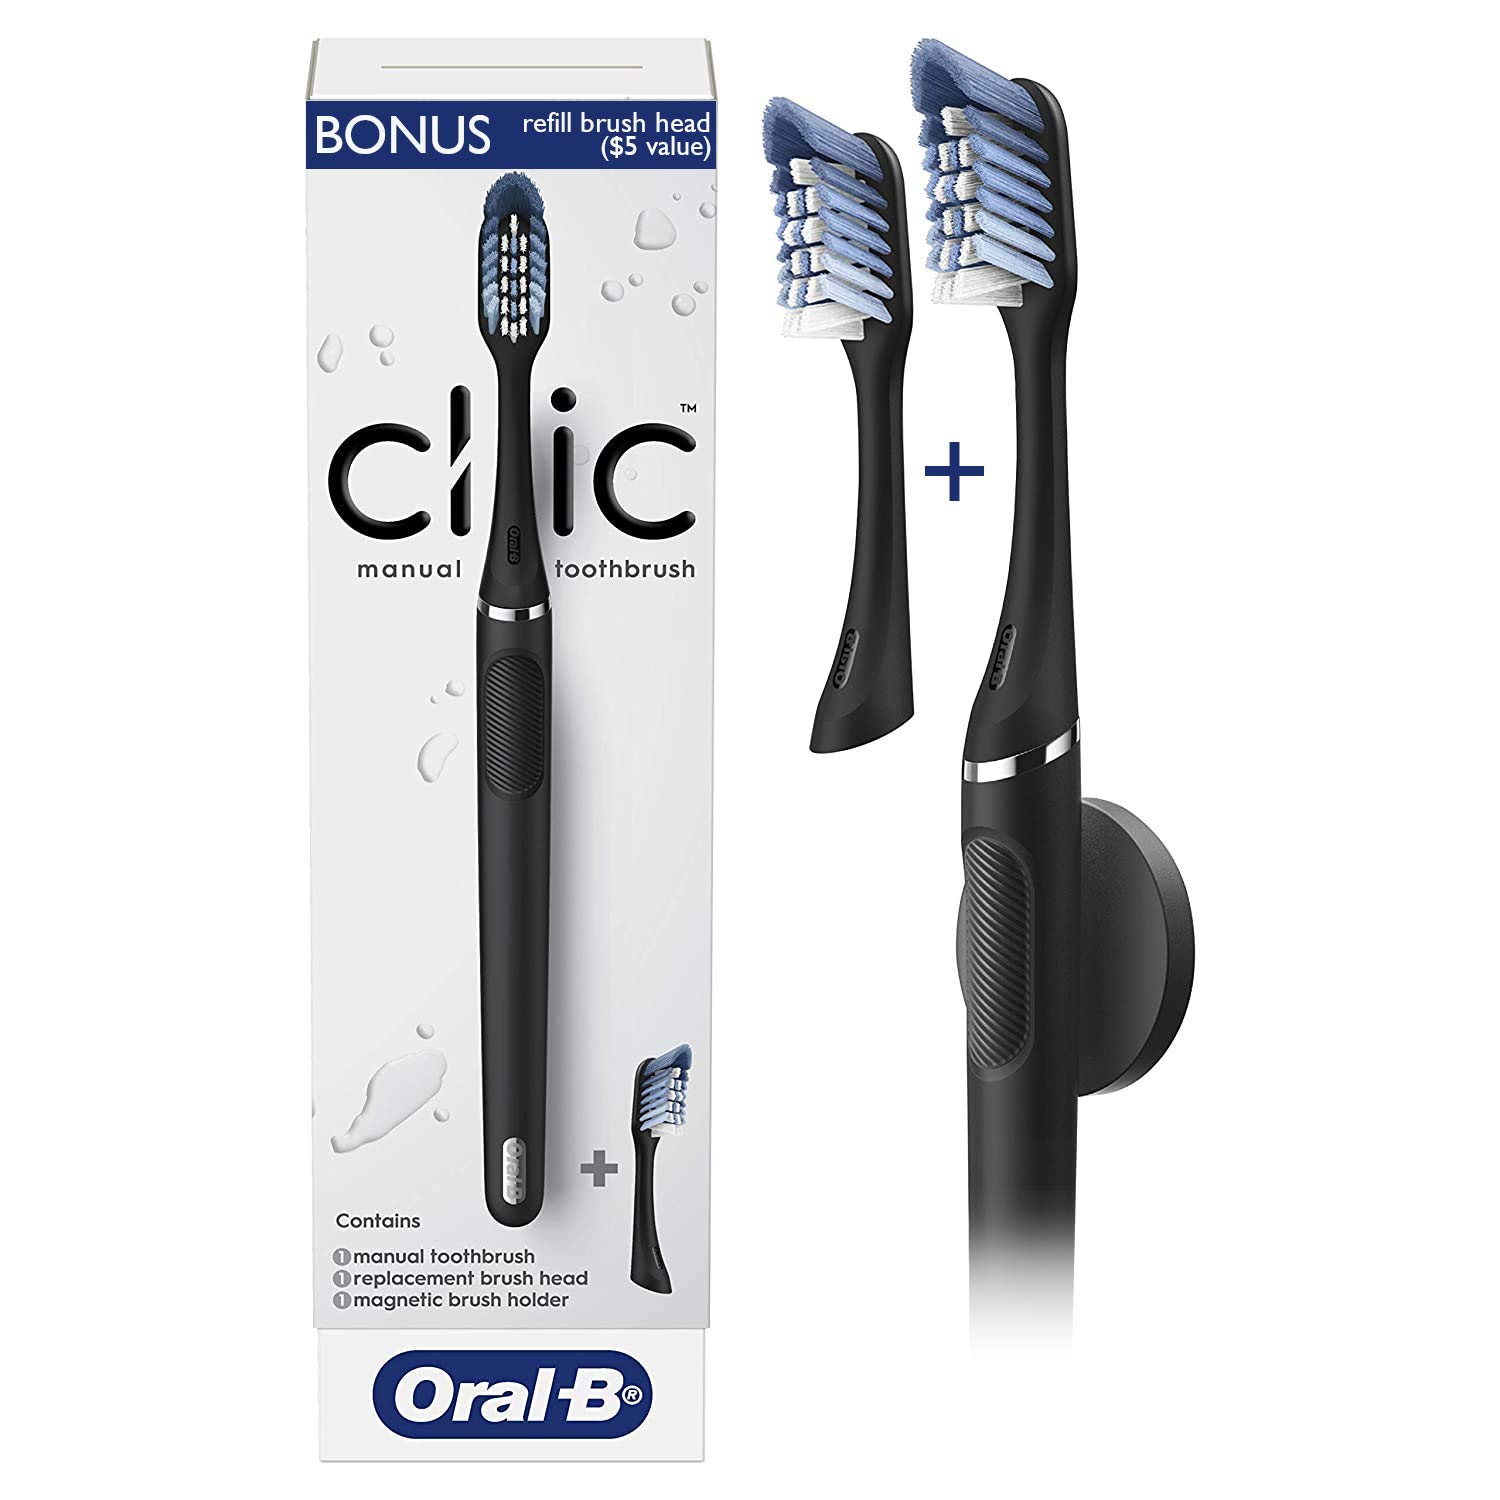 Oral-B Clic Manual Toothbrush with Bonus Replacement Brush Heads and Magnetic Toothbrush Holder | Stocking Stuffers For Adults | 